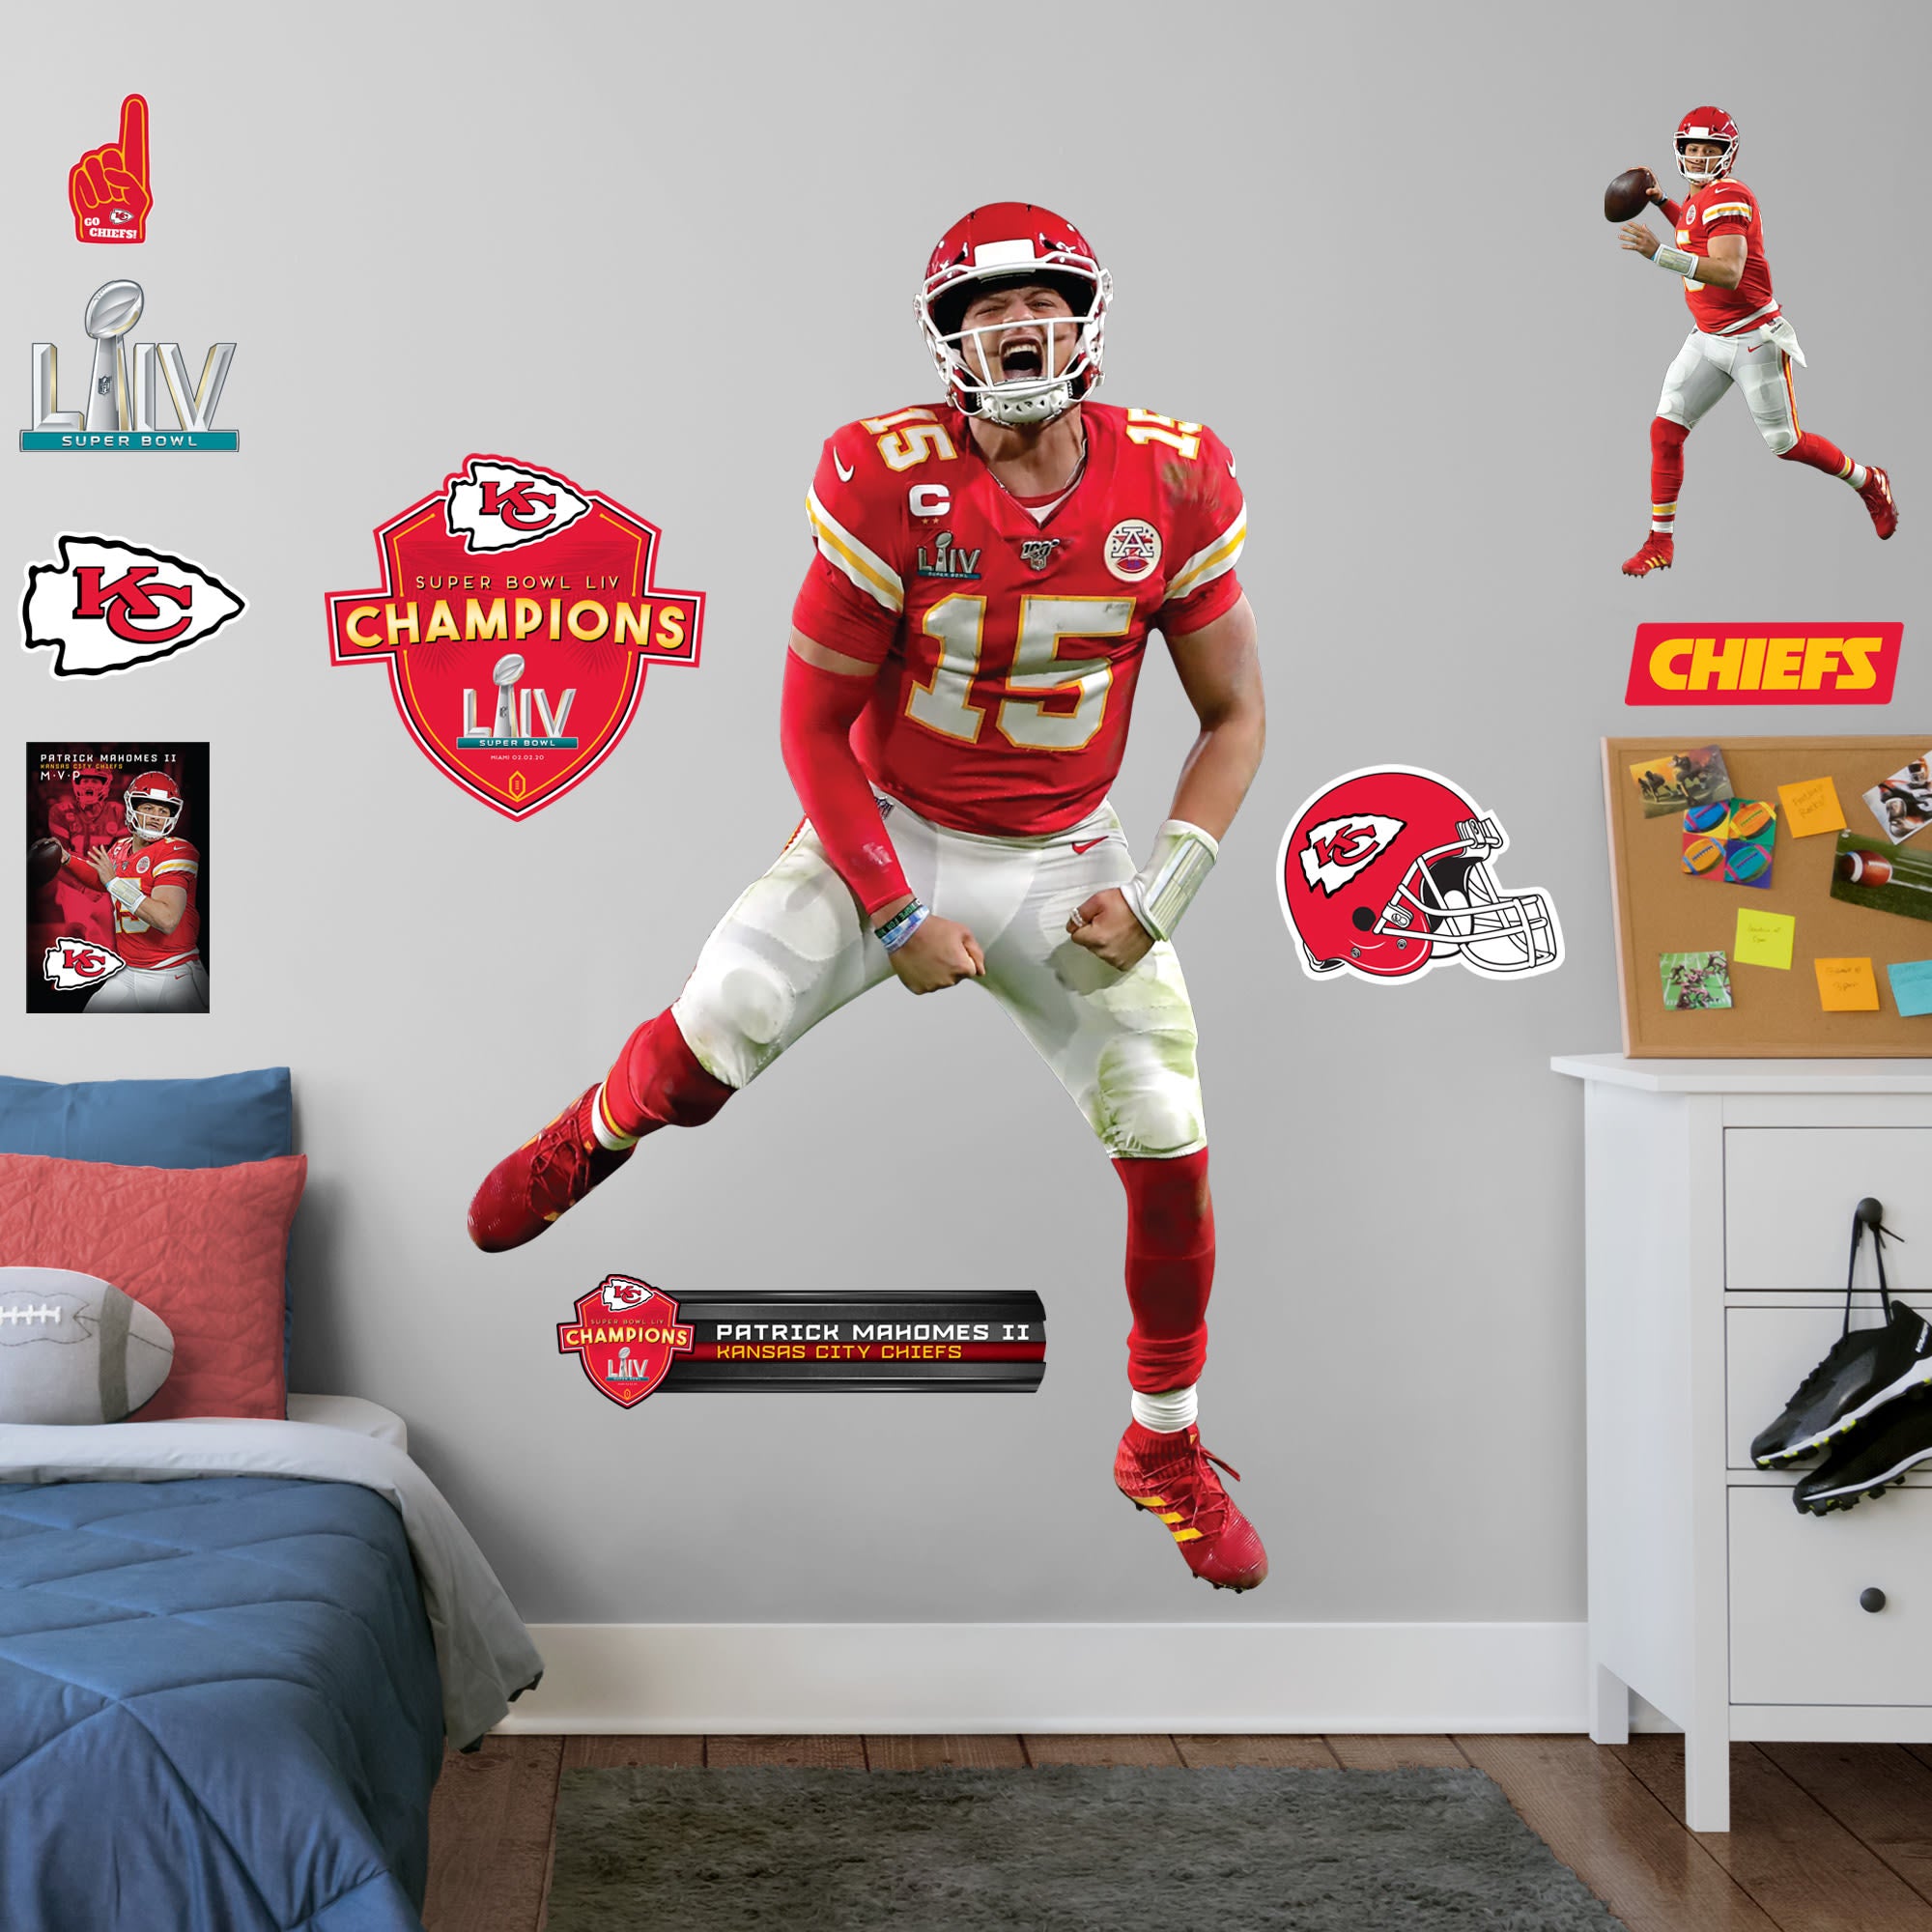 Patrick Mahomes for Kansas City Chiefs: Super Bowl LIV MVP - Officially Licensed NFL Removable Wall Decal Life-Size Athlete + 11